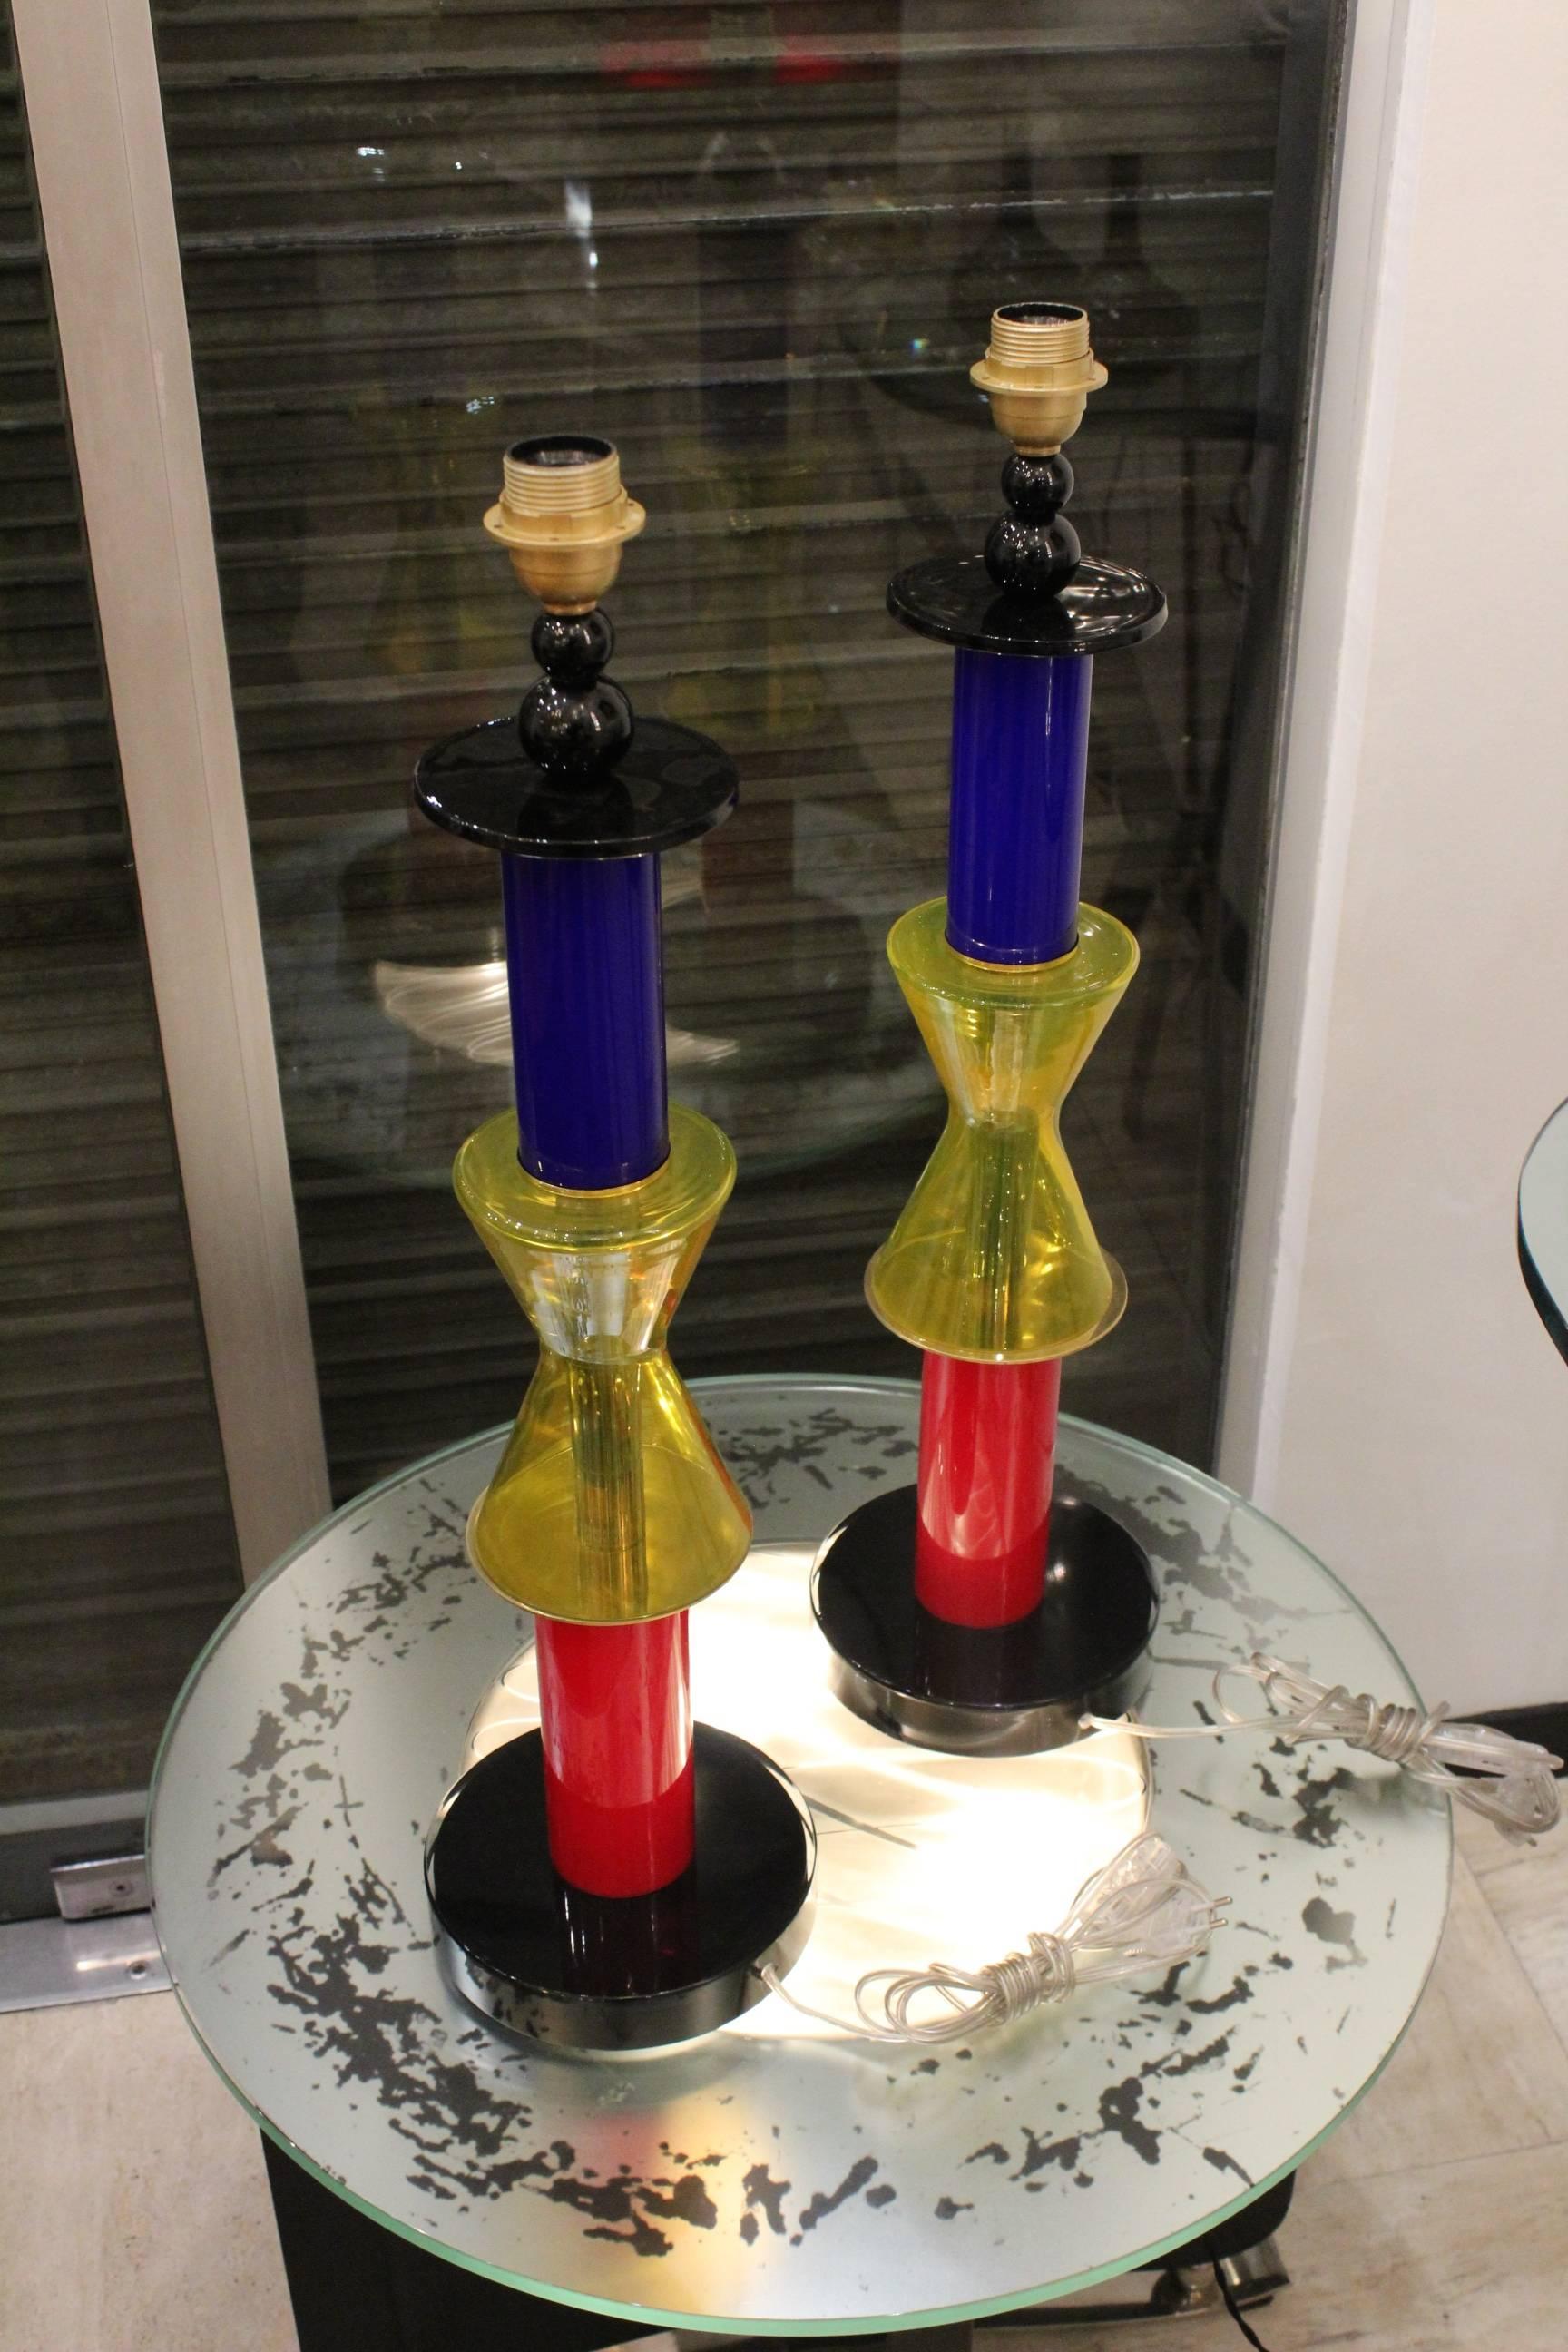 Pair of colored Murano glass table lamps, (Menphis style) in excellent condition.